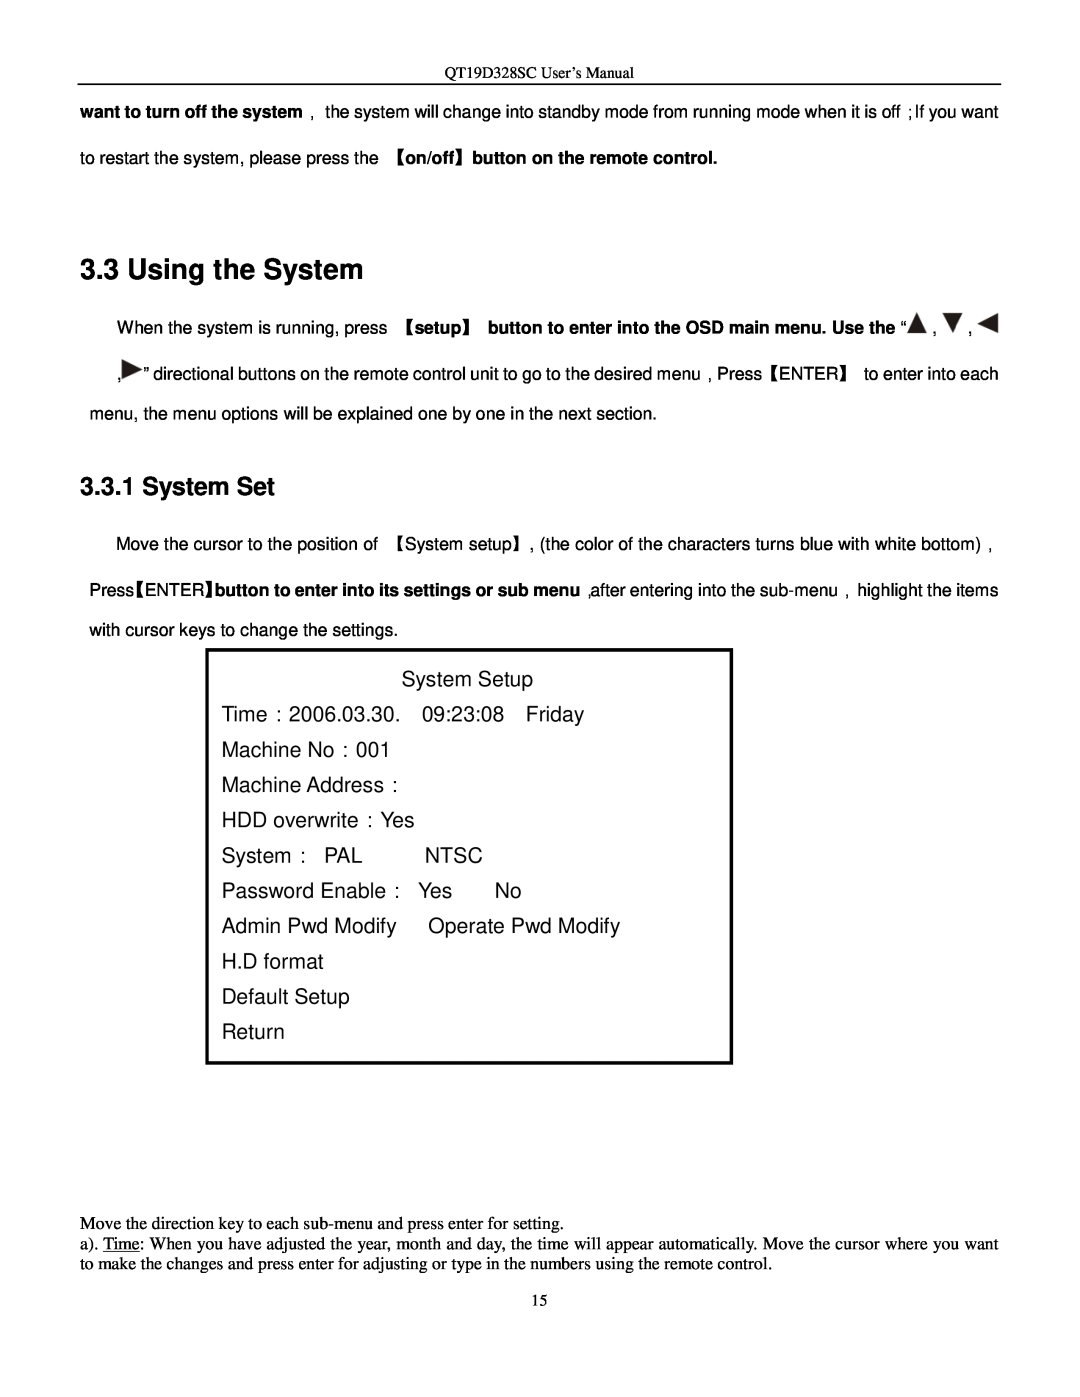 Q-See QT17D324SC user manual Using the System, System Set 